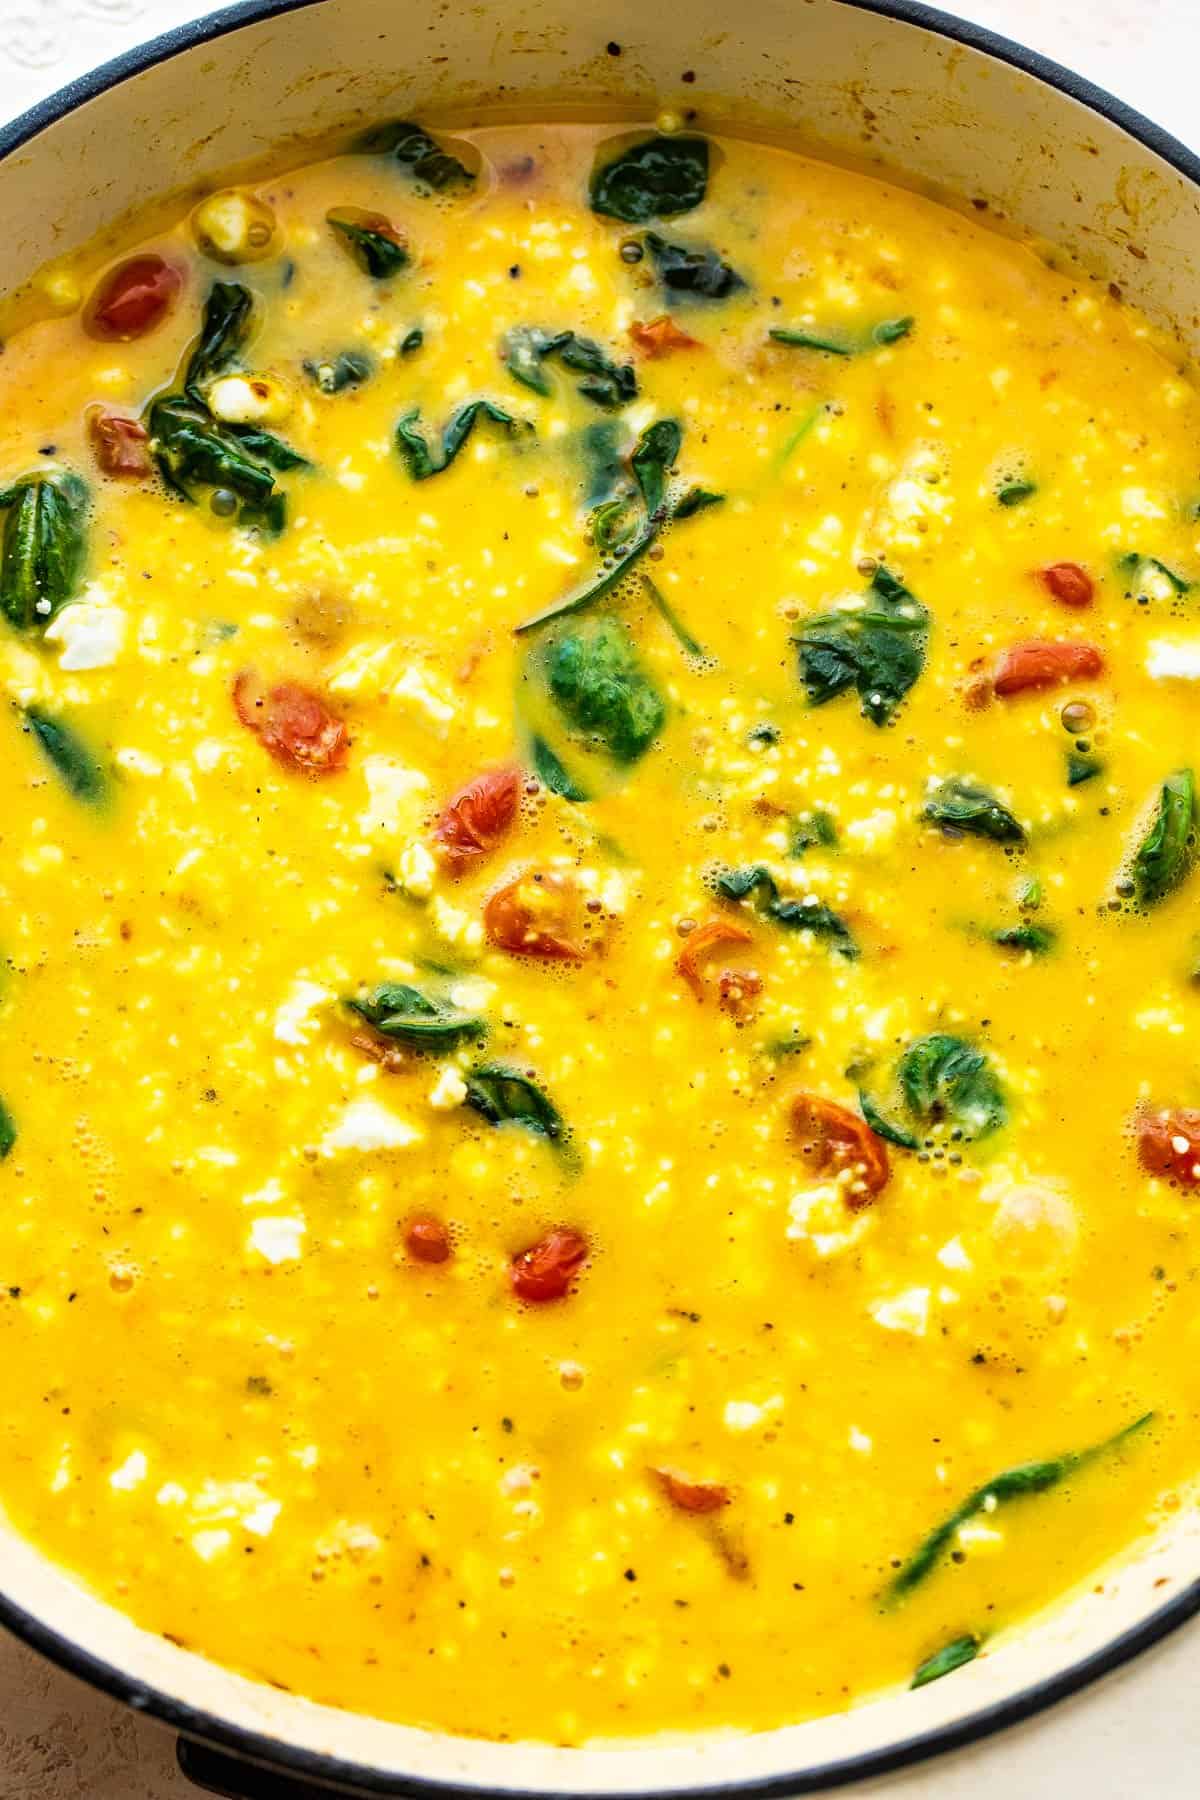 raw egg mixture with spinach and tomatoes poured into a white frying pan